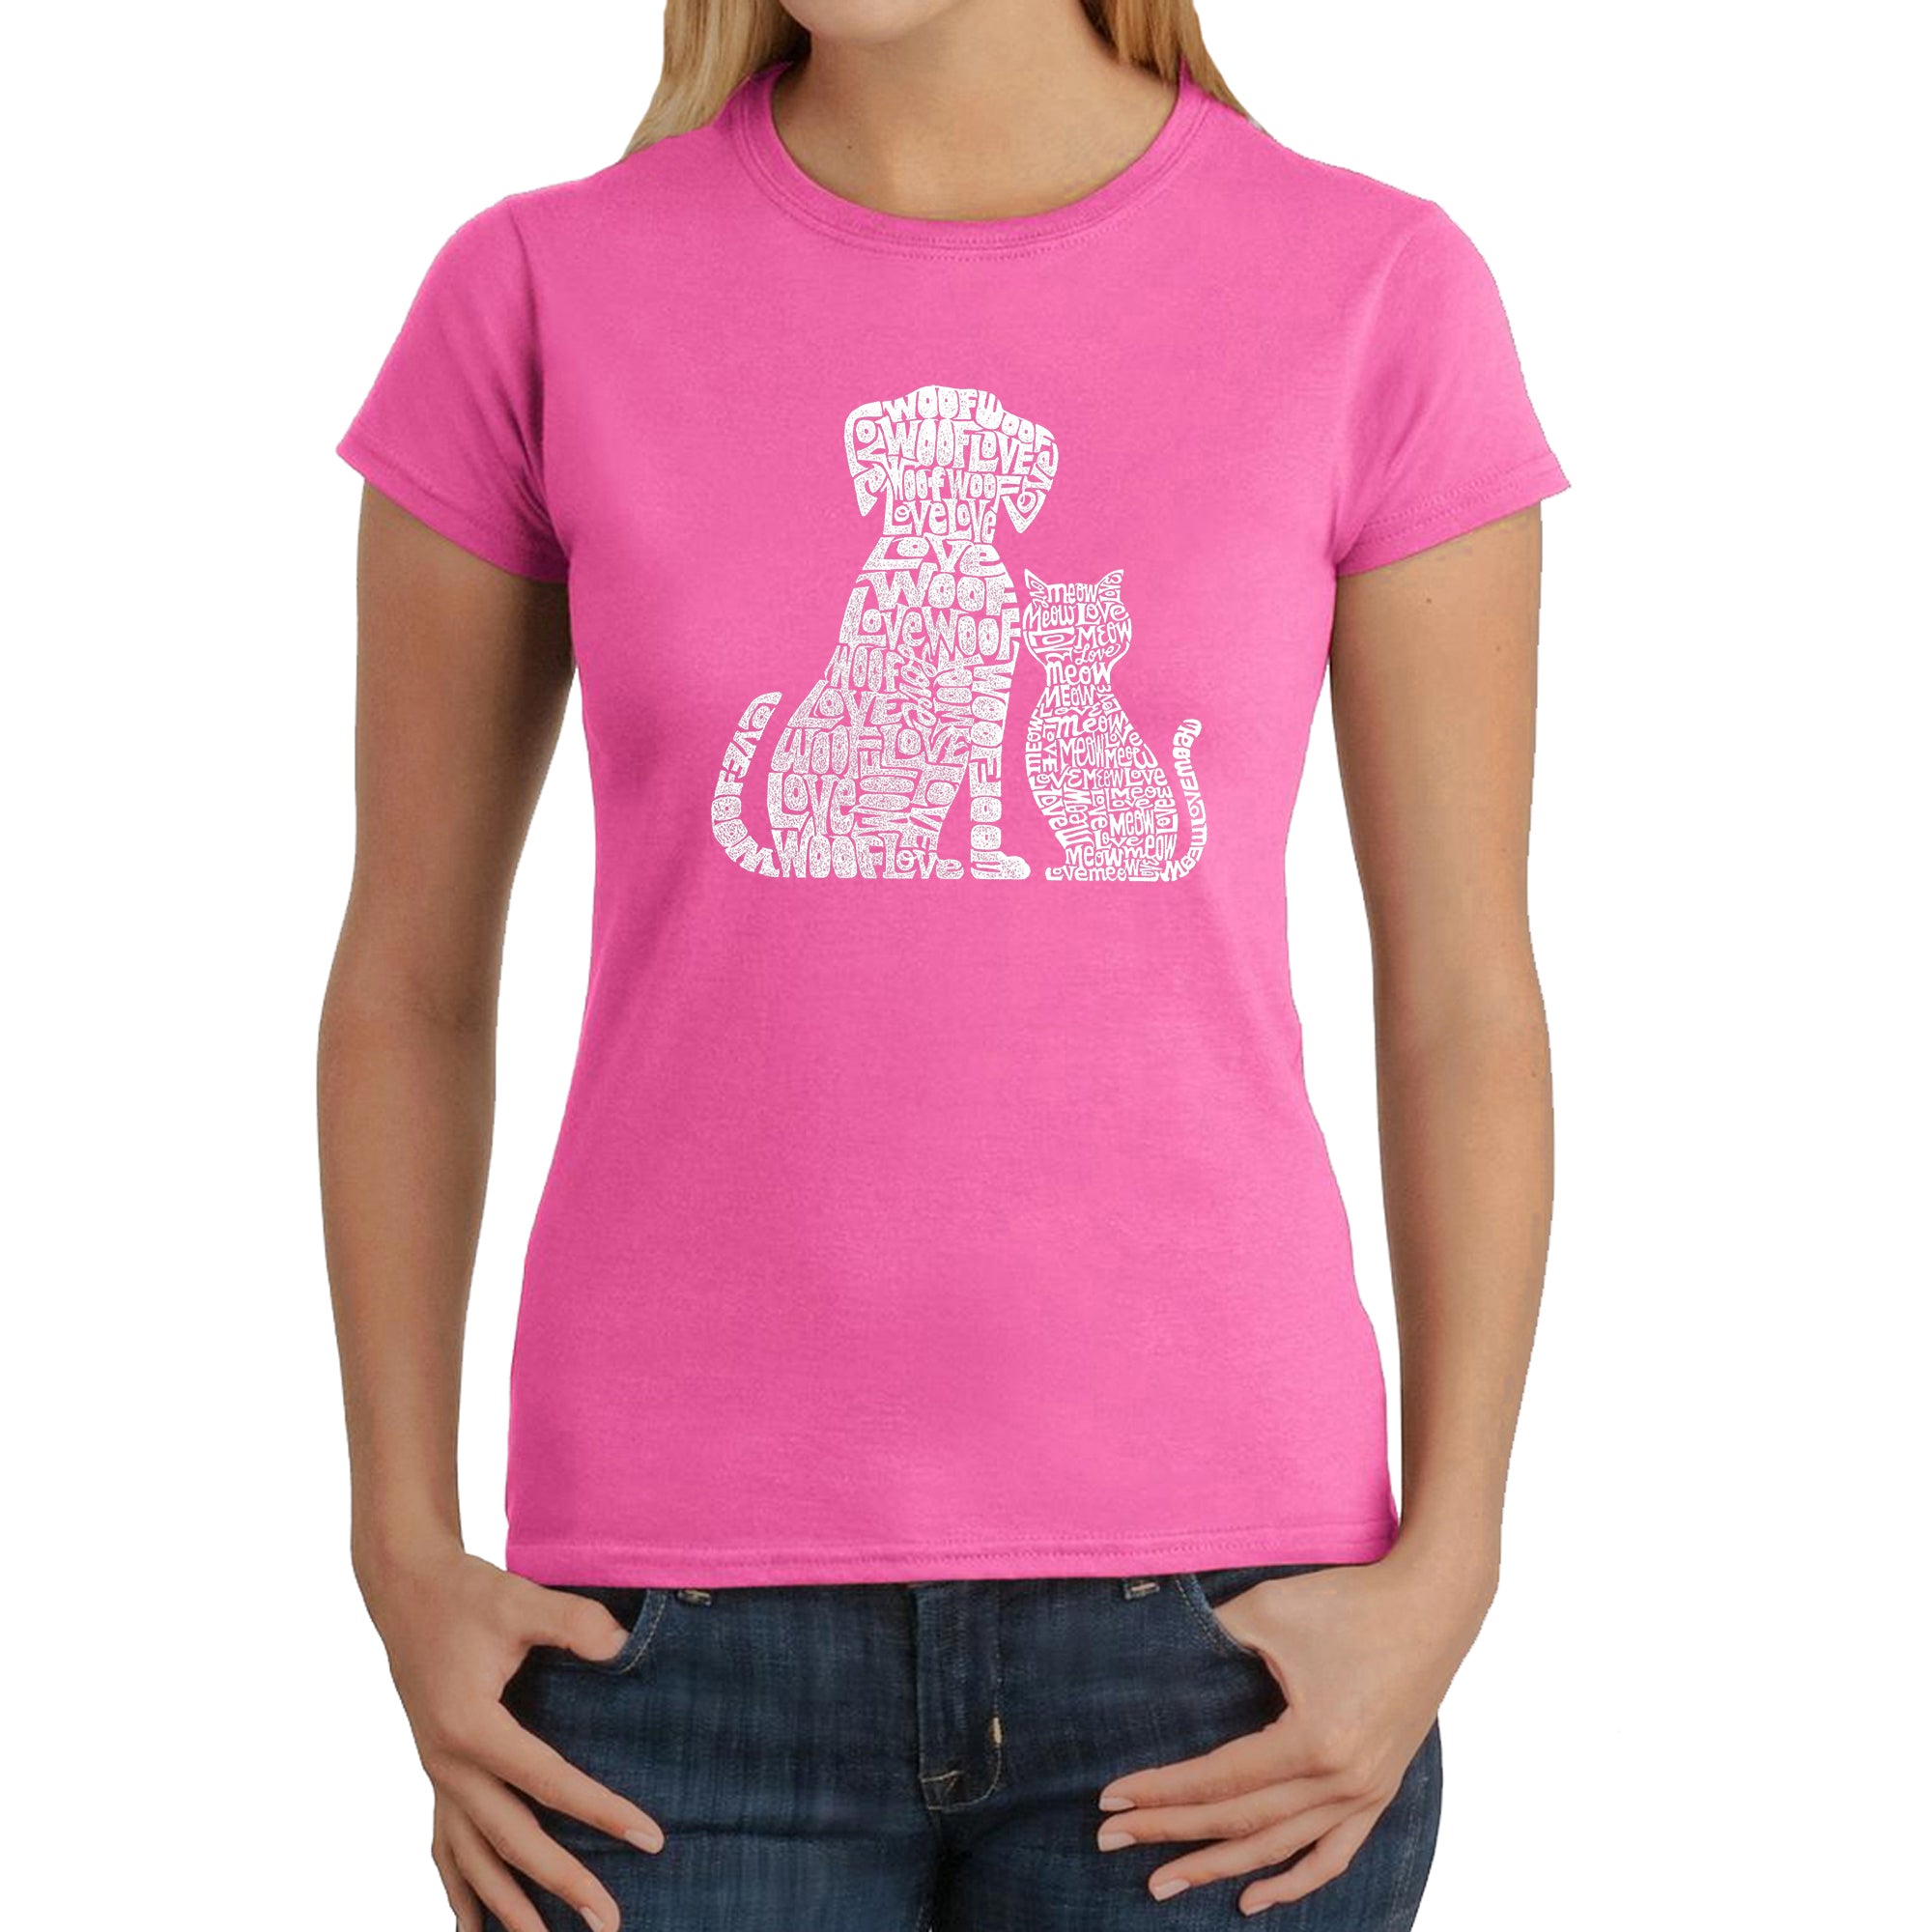 Dogs And Cats - Women's Word Art T-Shirt - Pink - X-Large